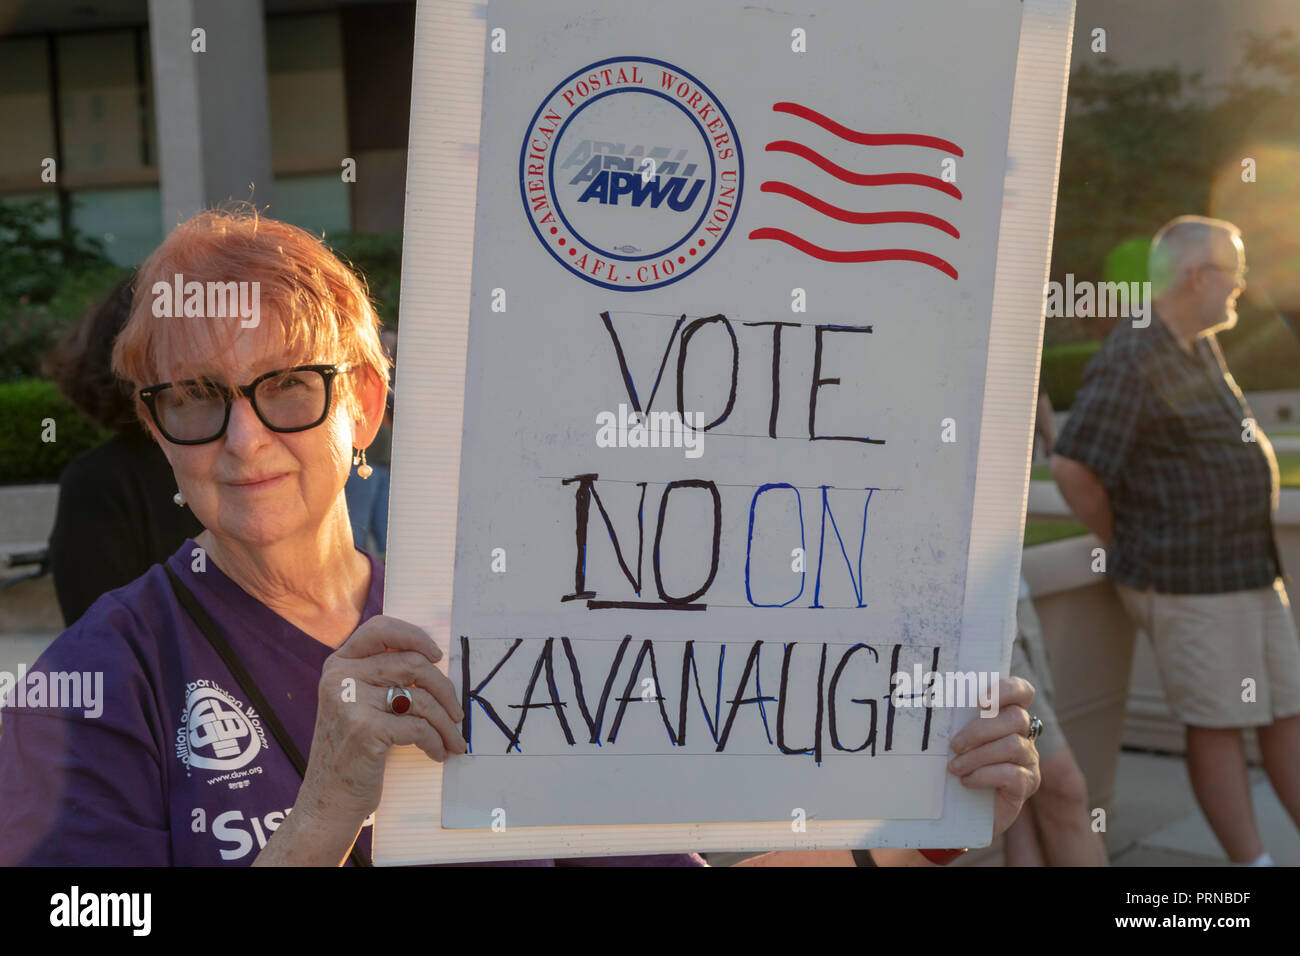 Detroit, Michigan USA - 3 October 2018 - People gathered at the McNamara Federal Building to oppose the confirmation of Brett Kavanaugh to the Supreme Court. The rally was organized by MoveOn.org. Credit: Jim West/Alamy Live News Stock Photo